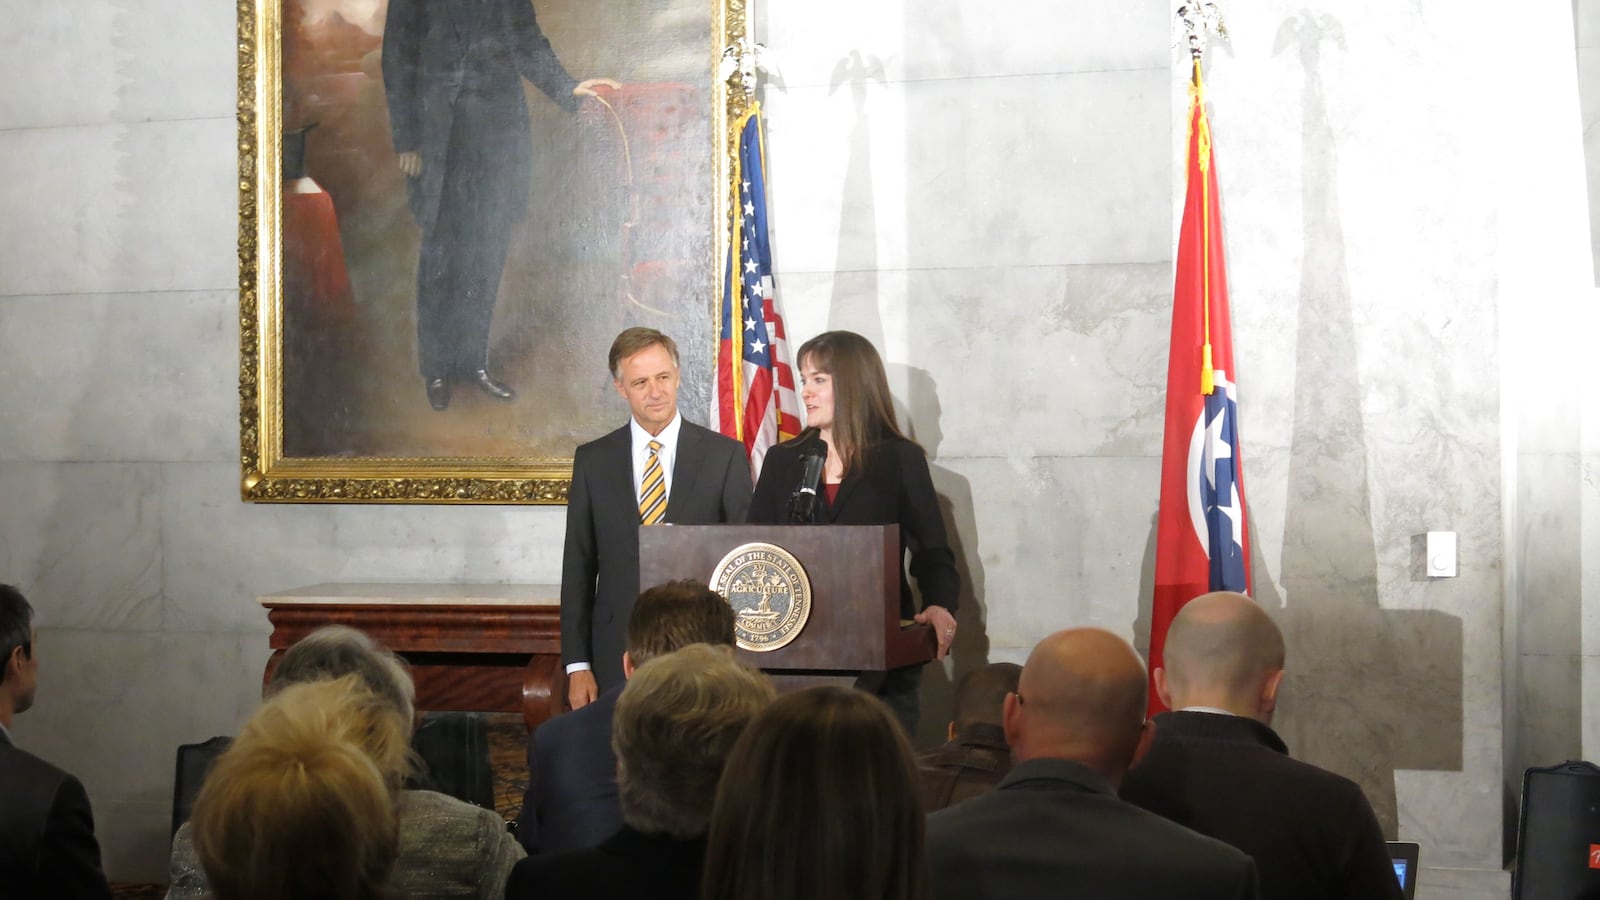 Candice McQueen and Bill Haslam announced McQueen's new job at the state capitol.